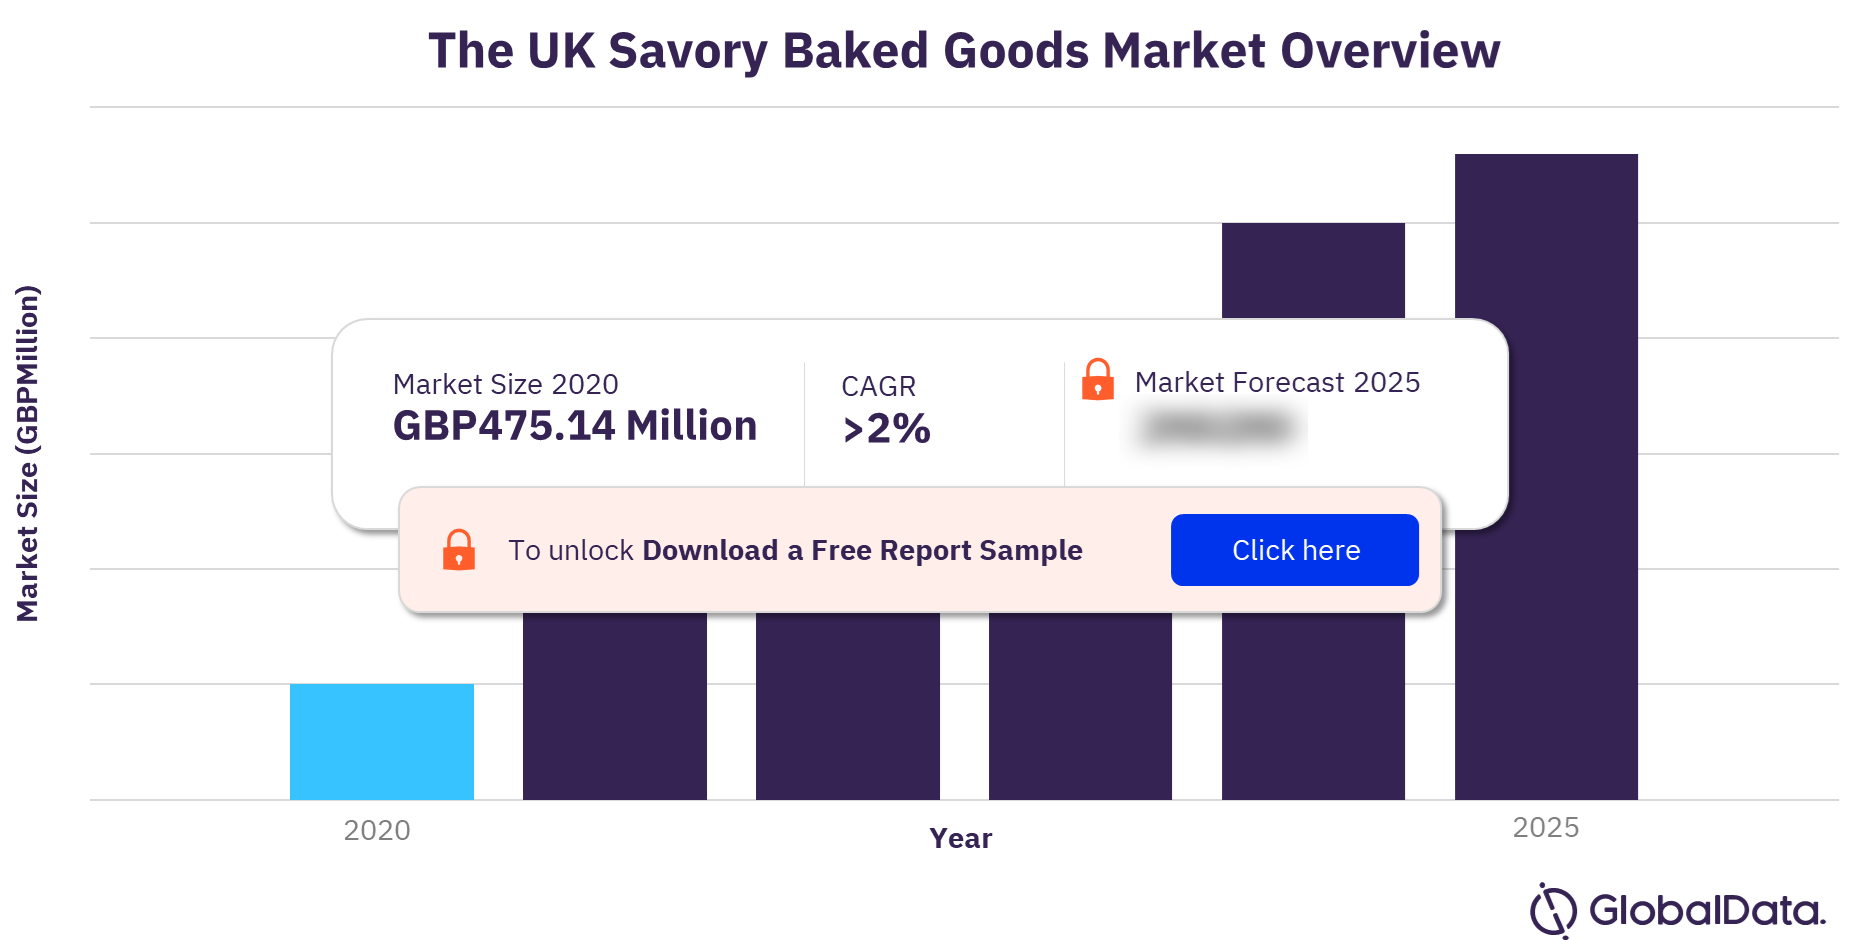 The UK savory baked goods market overview